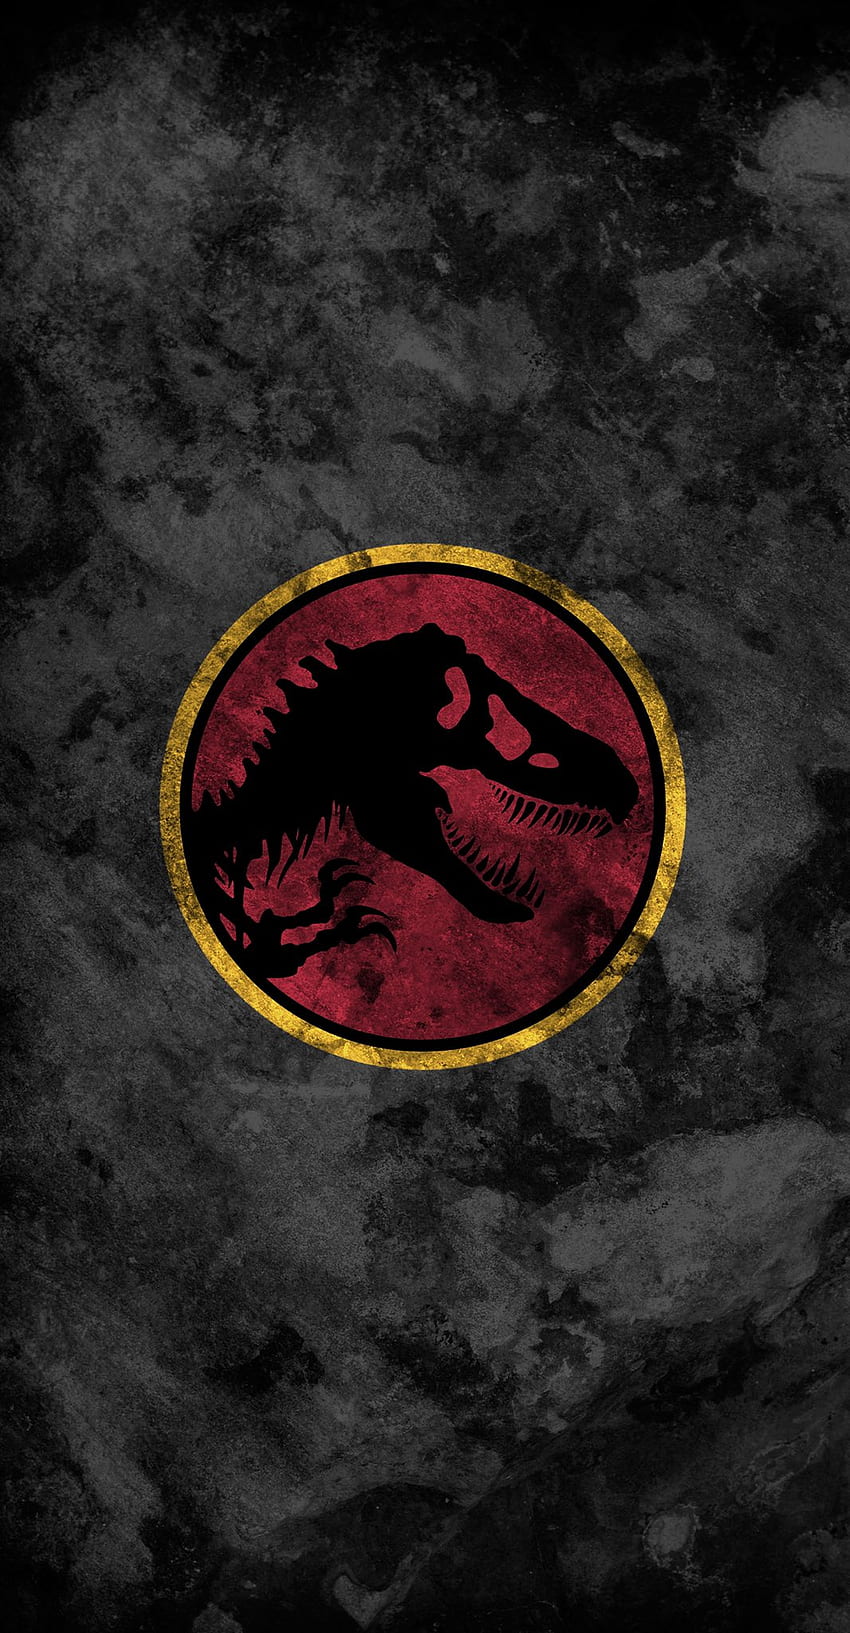 Neemz - The Movie Poster Guy & Jurassic Your World - Updated this HD phone wallpaper